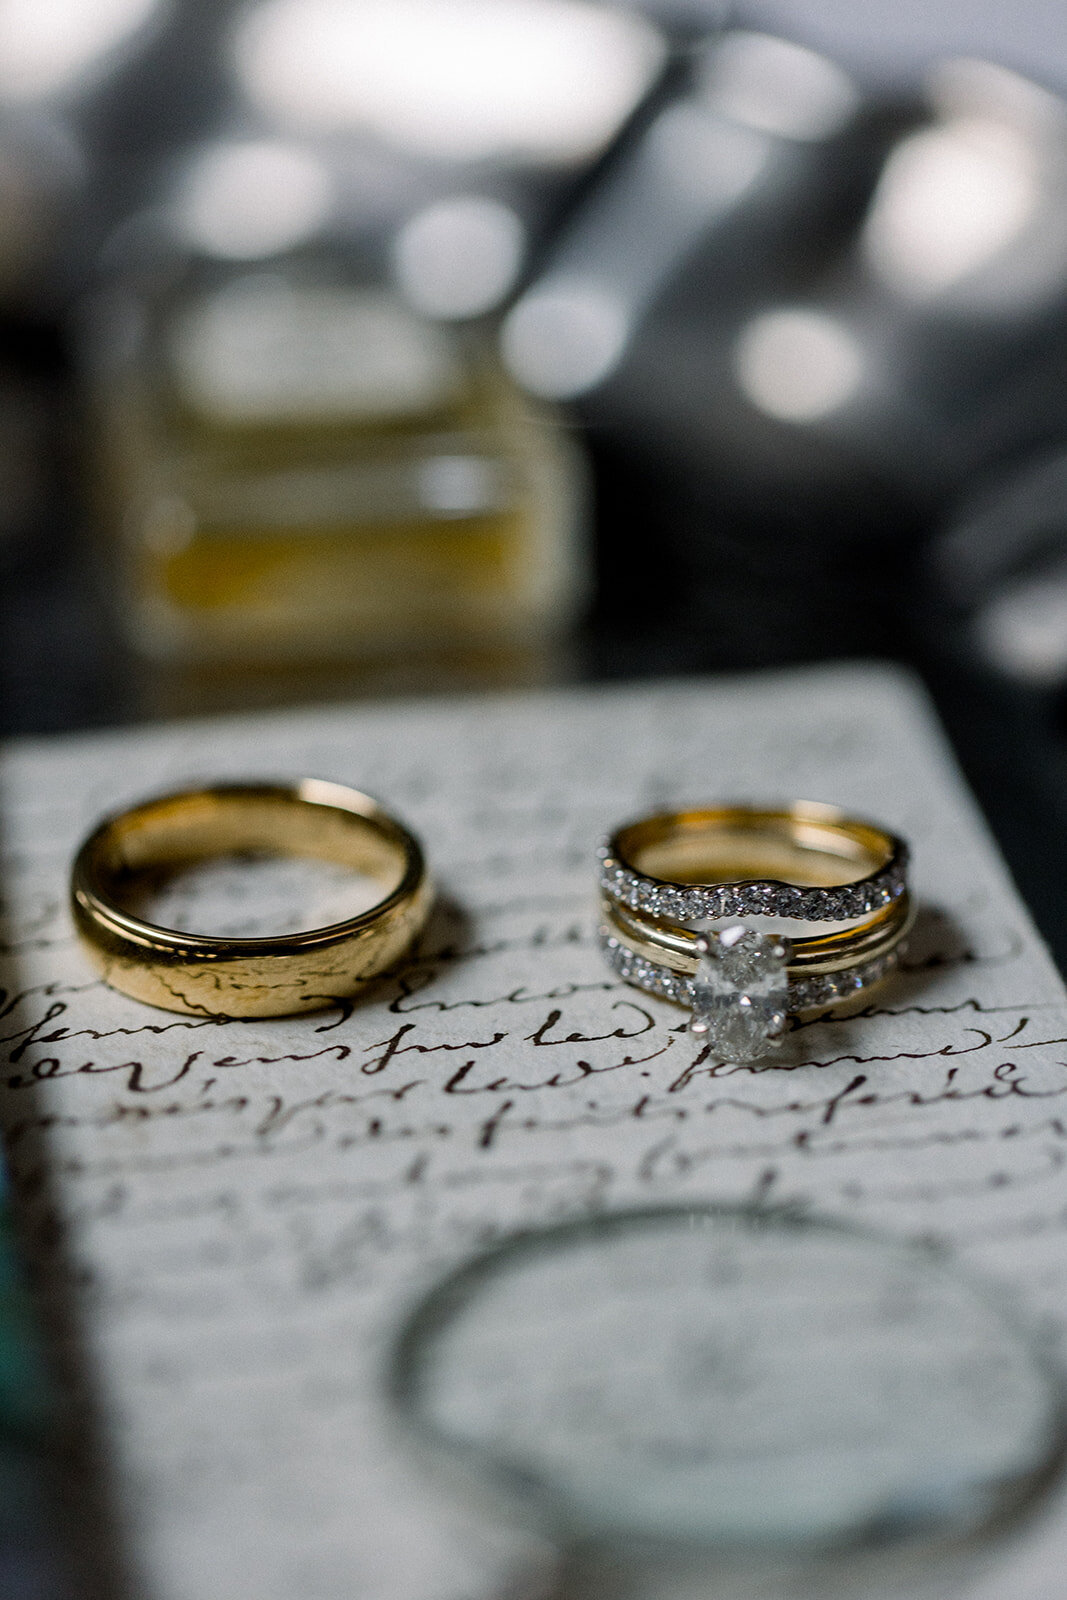 rings on an antique love letter in chicago hotel